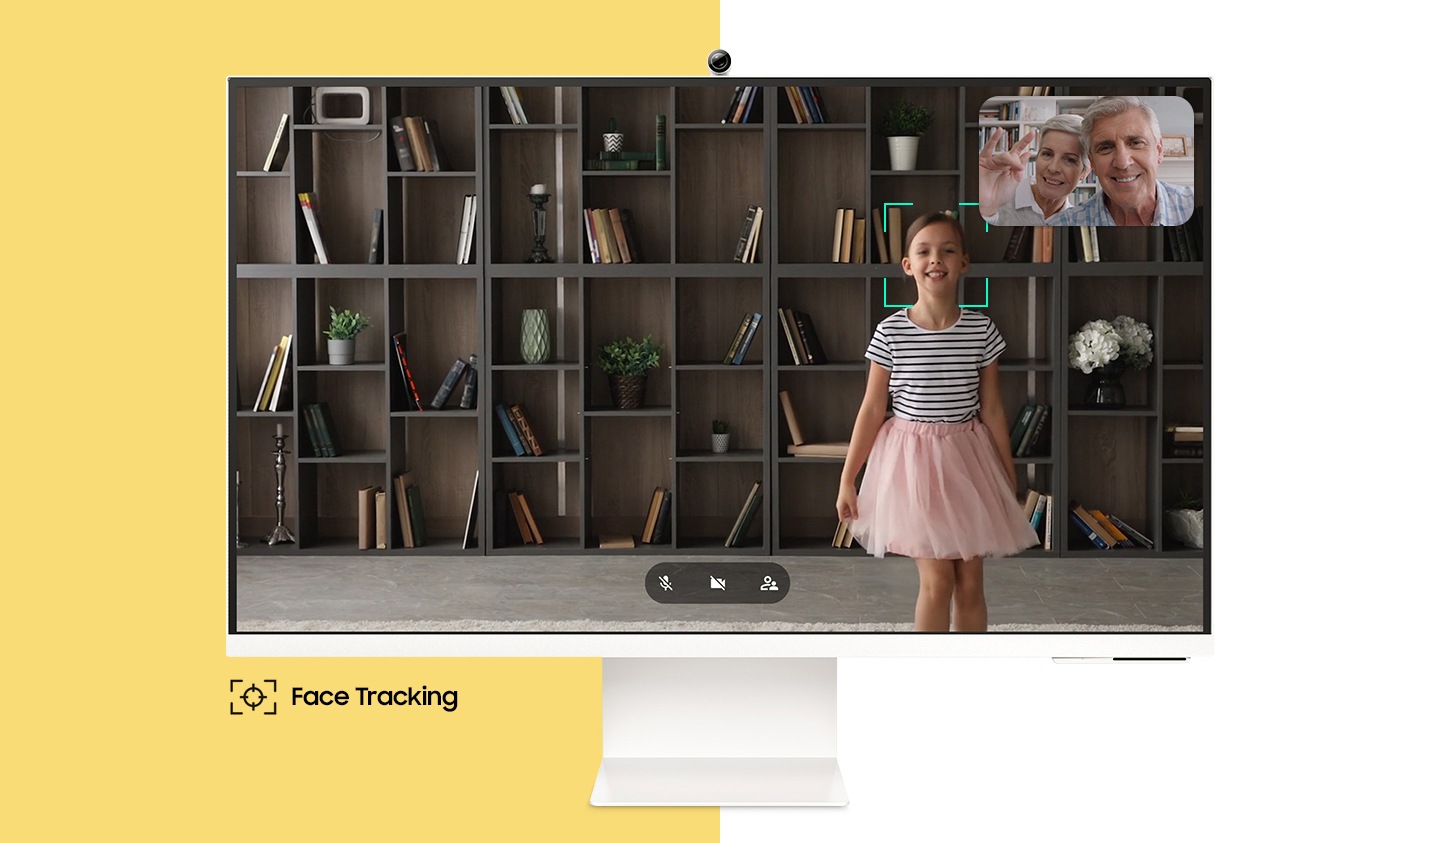 On the monitor screen, a girl is dancing, and in the upper right corner of the screen, her grandparents are smiling. There is a square mark around the girl's face, which also moves as she moves. And below the monitor, the text †Face Tracking' appears with its icon.